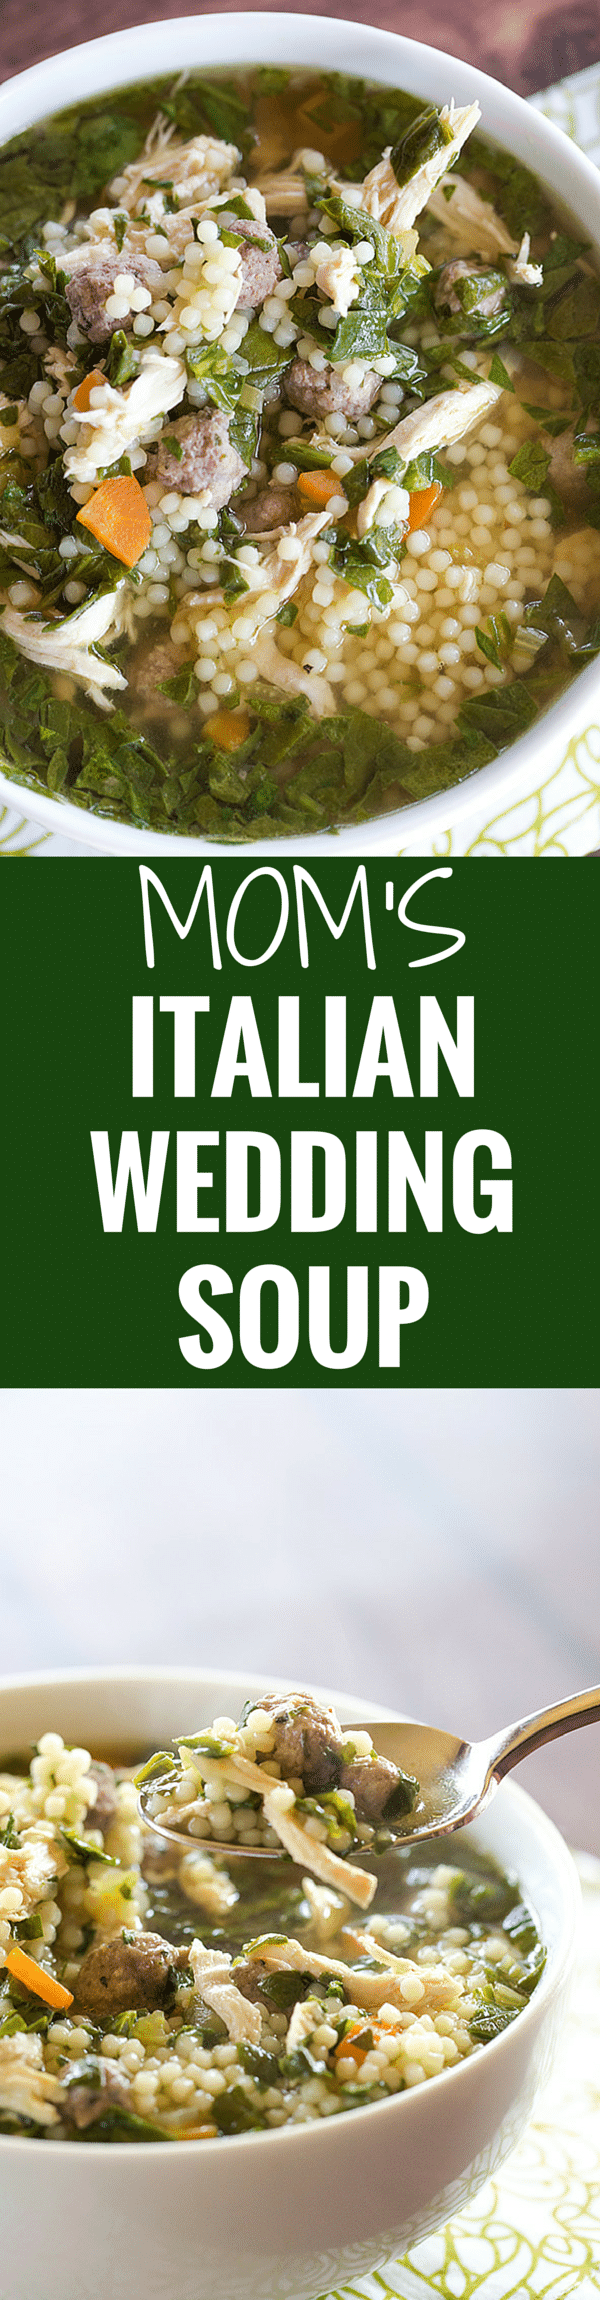 A classic Italian wedding soup recipe, with little bits of pasta, shredded chicken, spinach and of course those little meatballs!